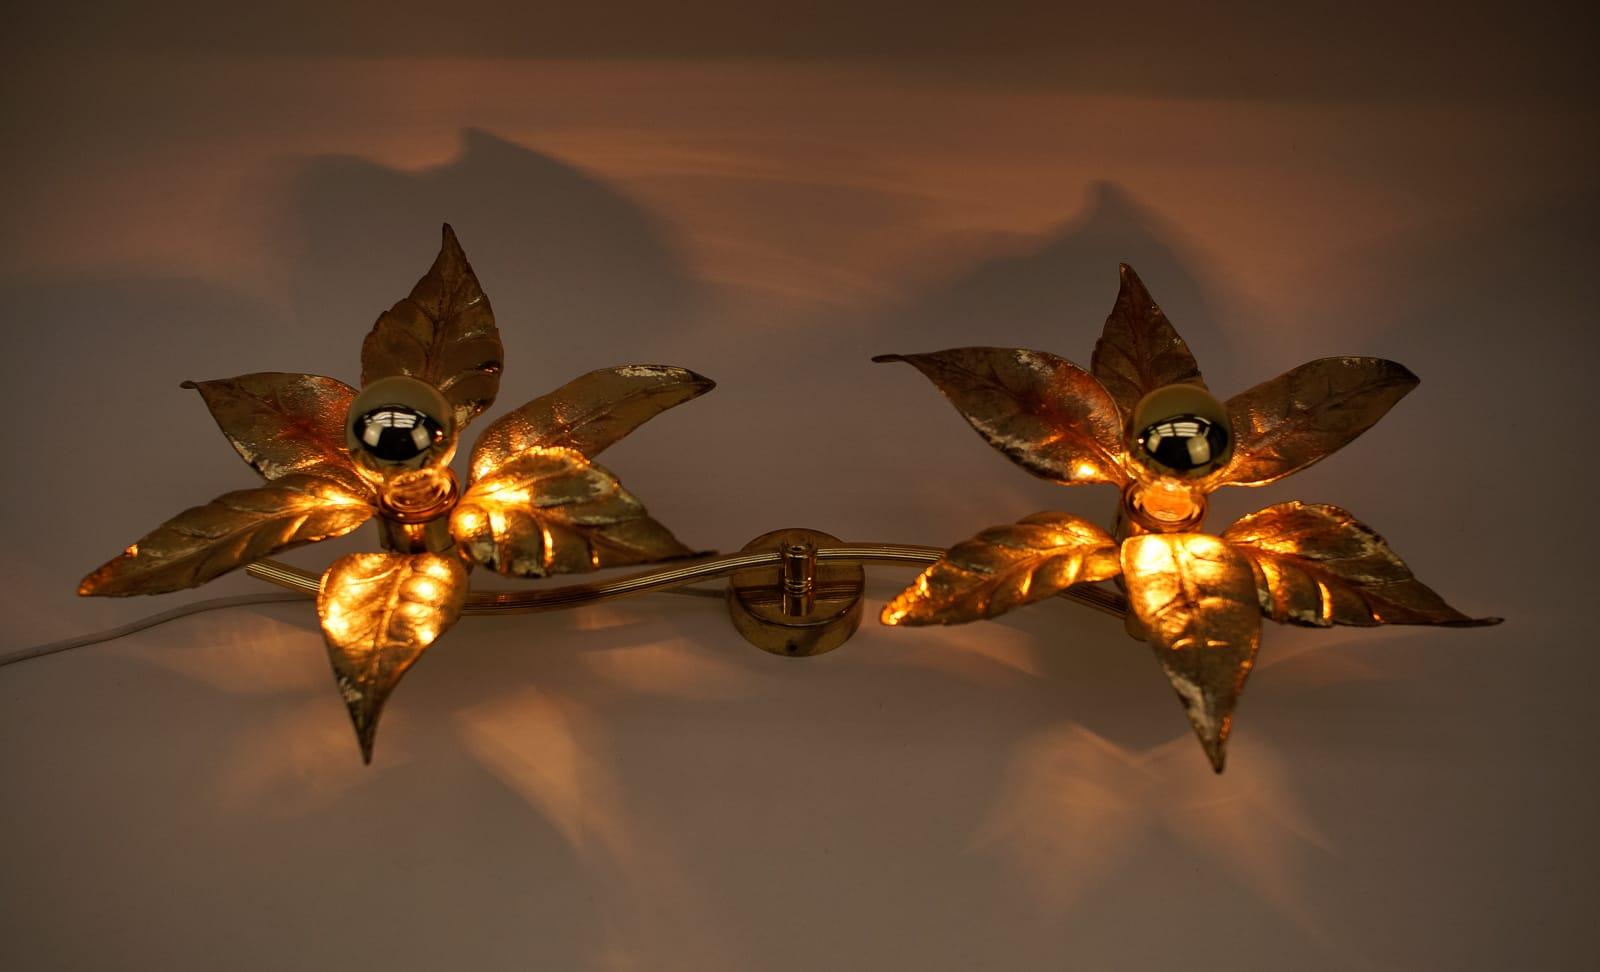 Wall or Ceiling Double Lamp by Willy Daro for Massive, Belgium, 1960s In Good Condition For Sale In Nürnberg, Bayern